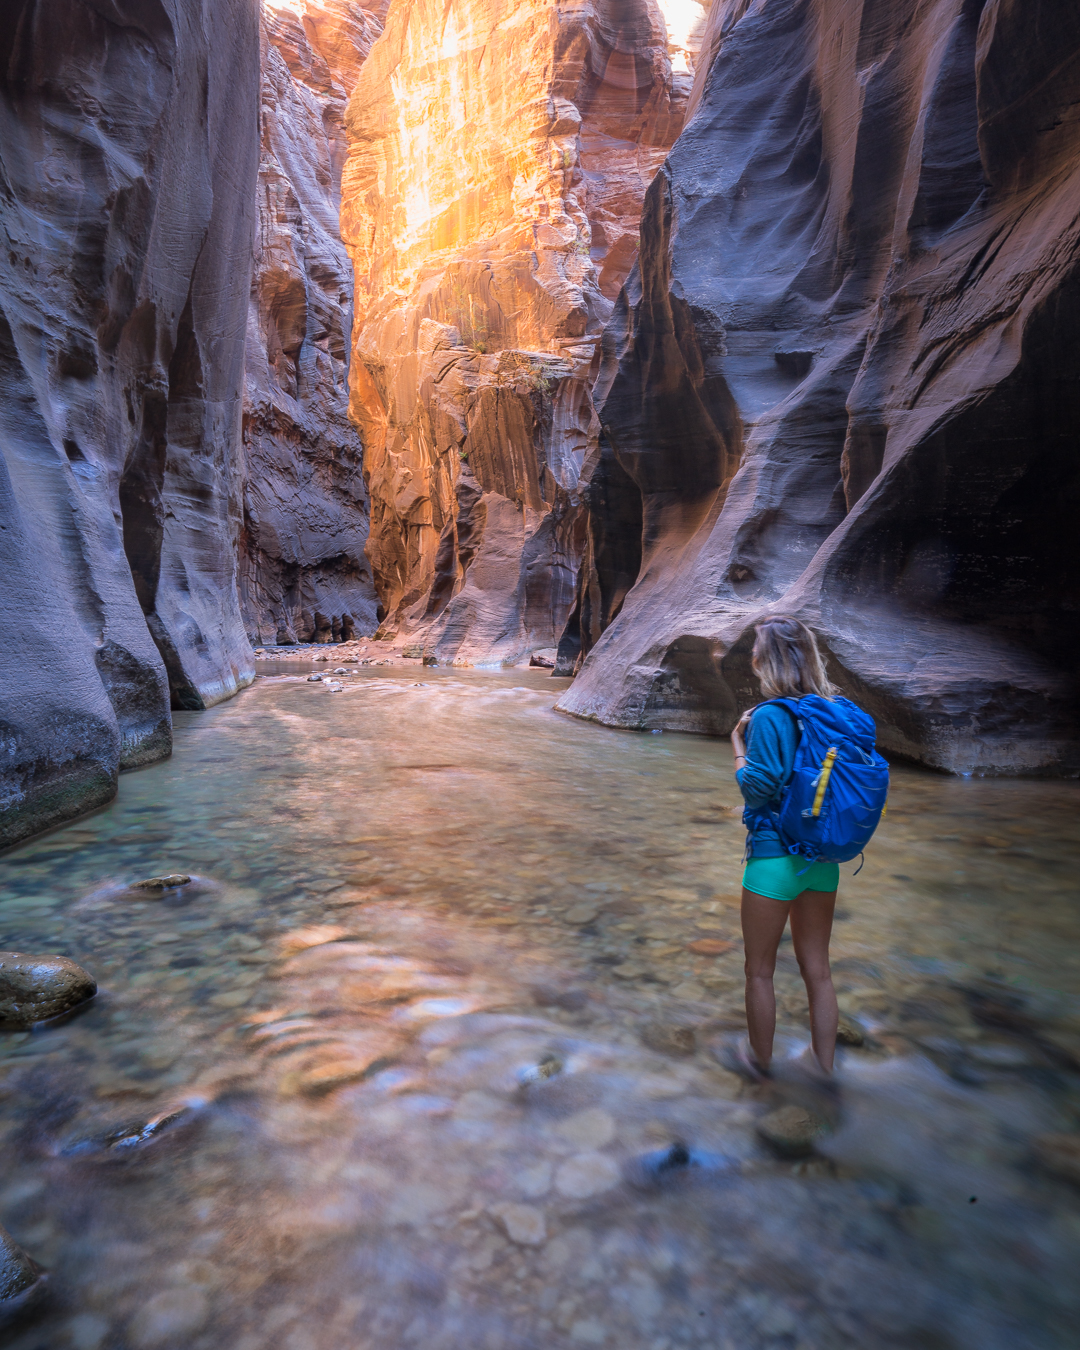 The Narrows in Zion National Park.